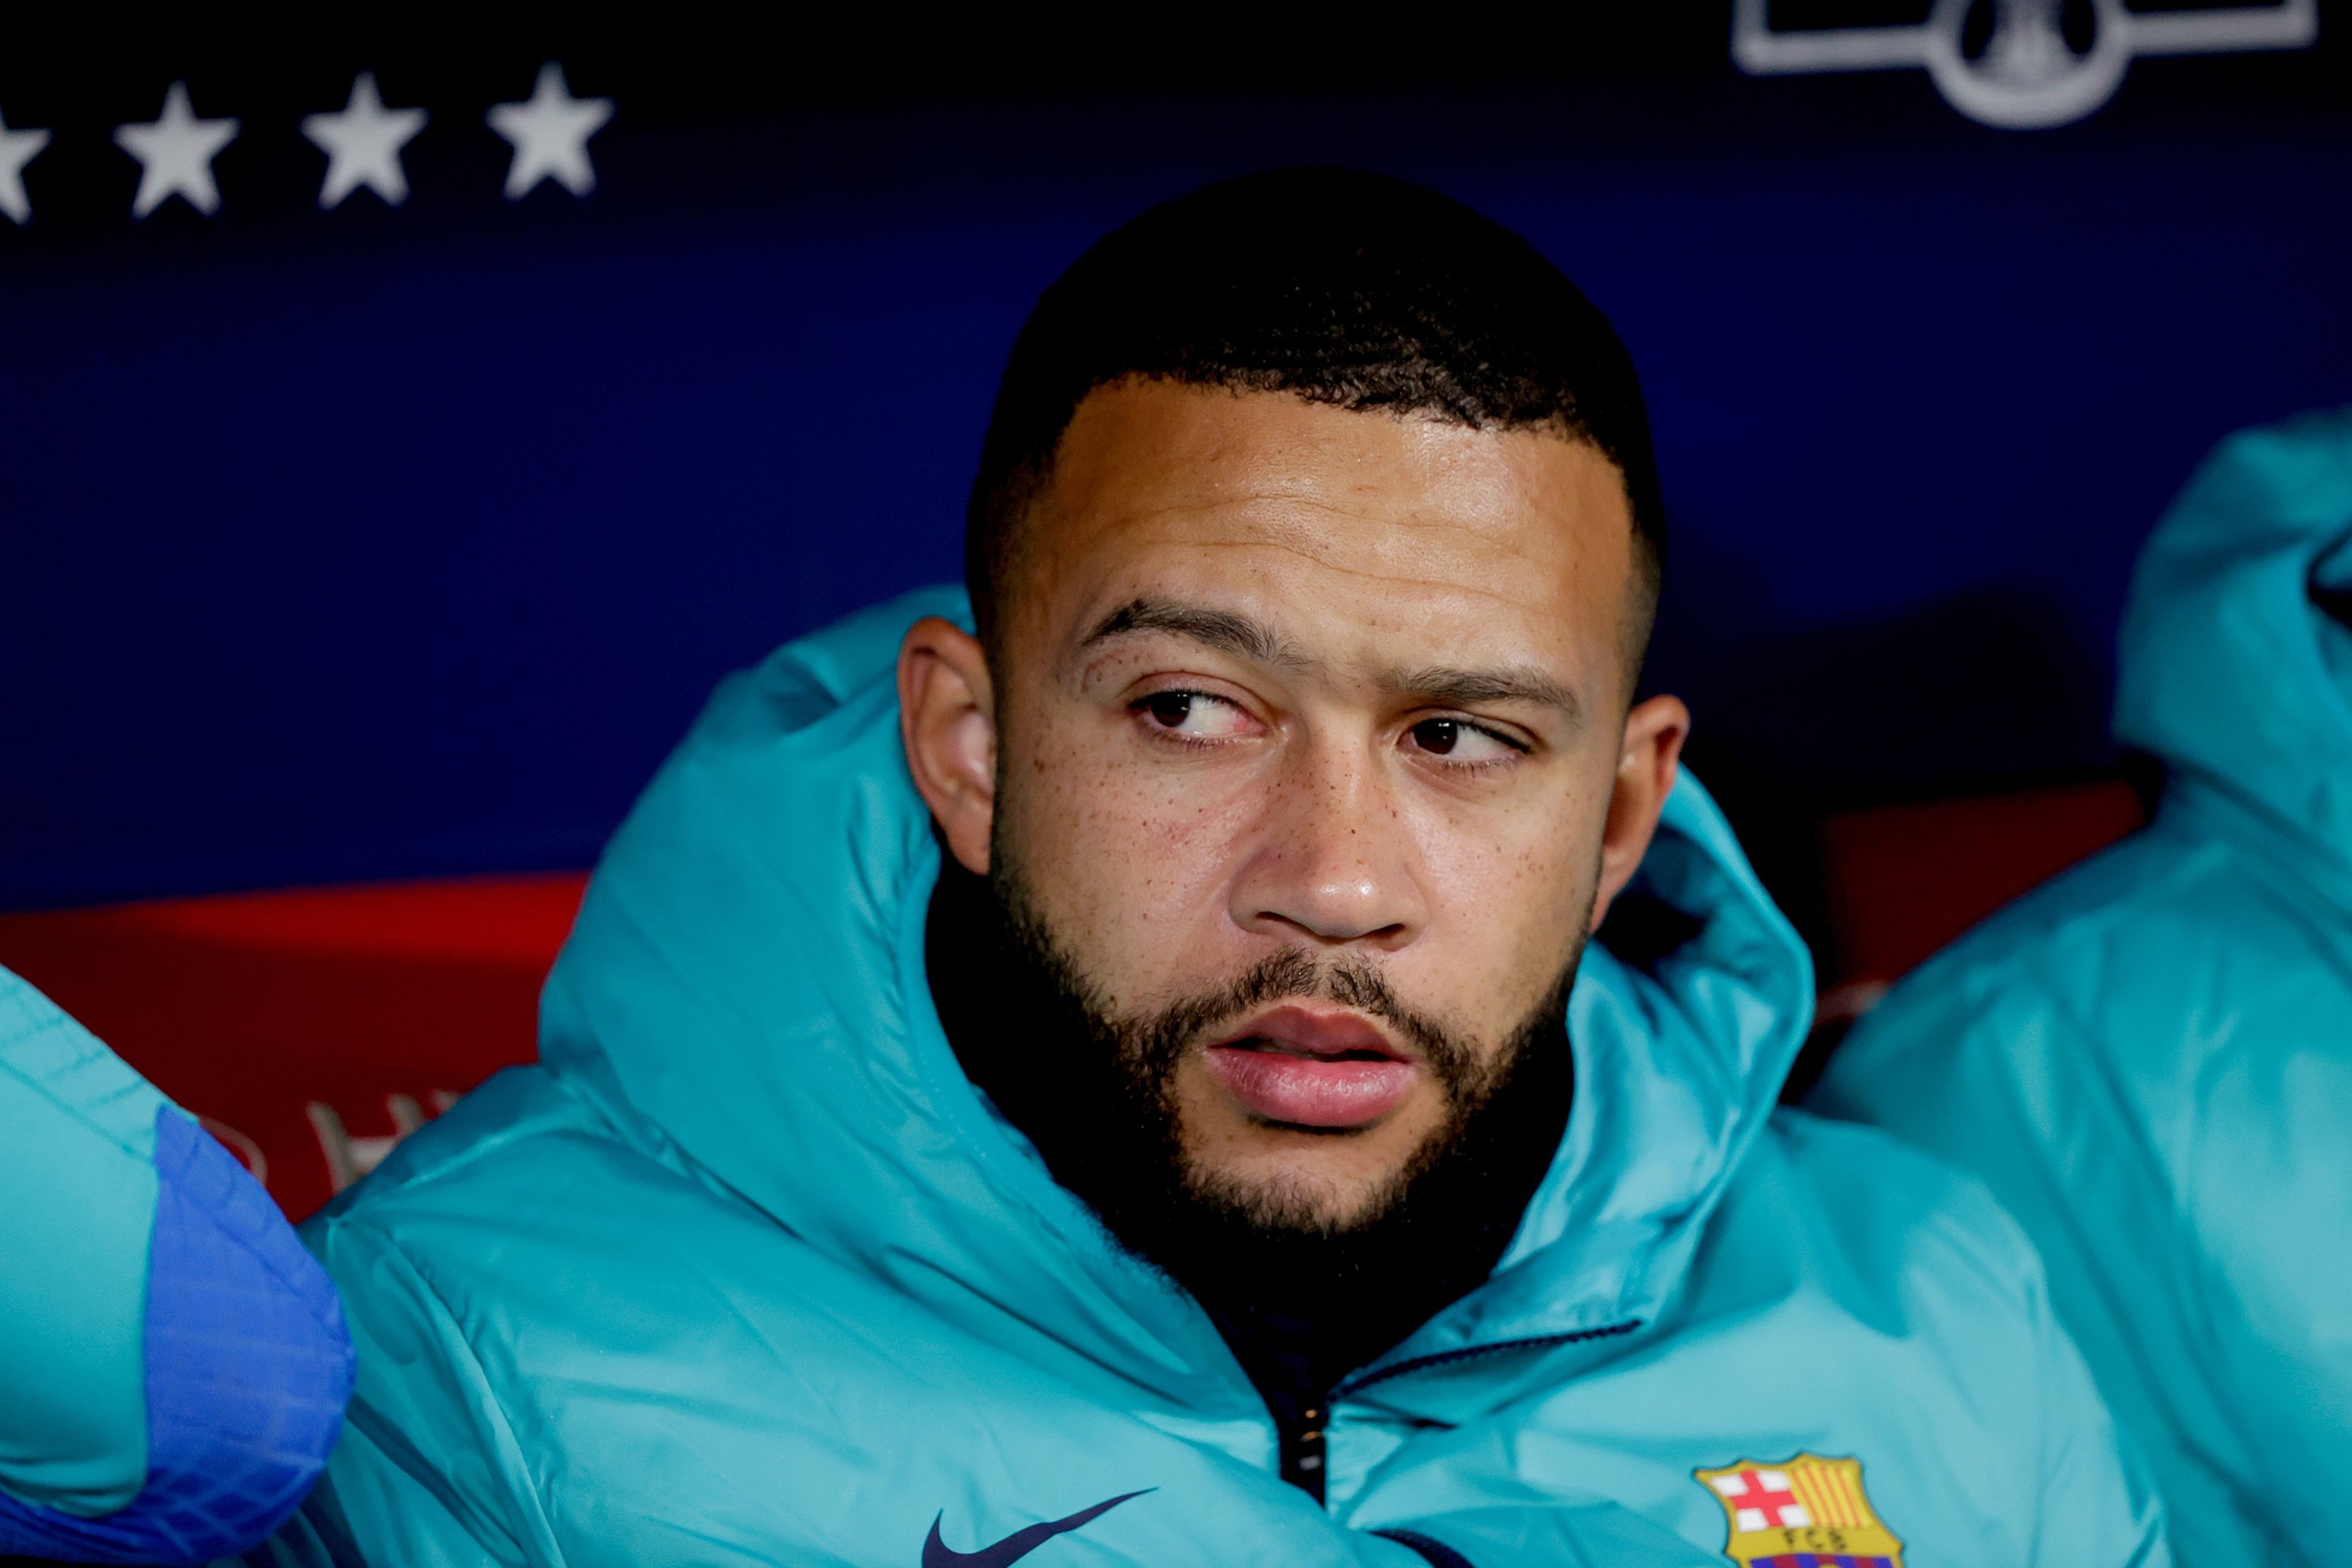 CRESTA negotiated and closed the transfer of Memphis Depay to FC